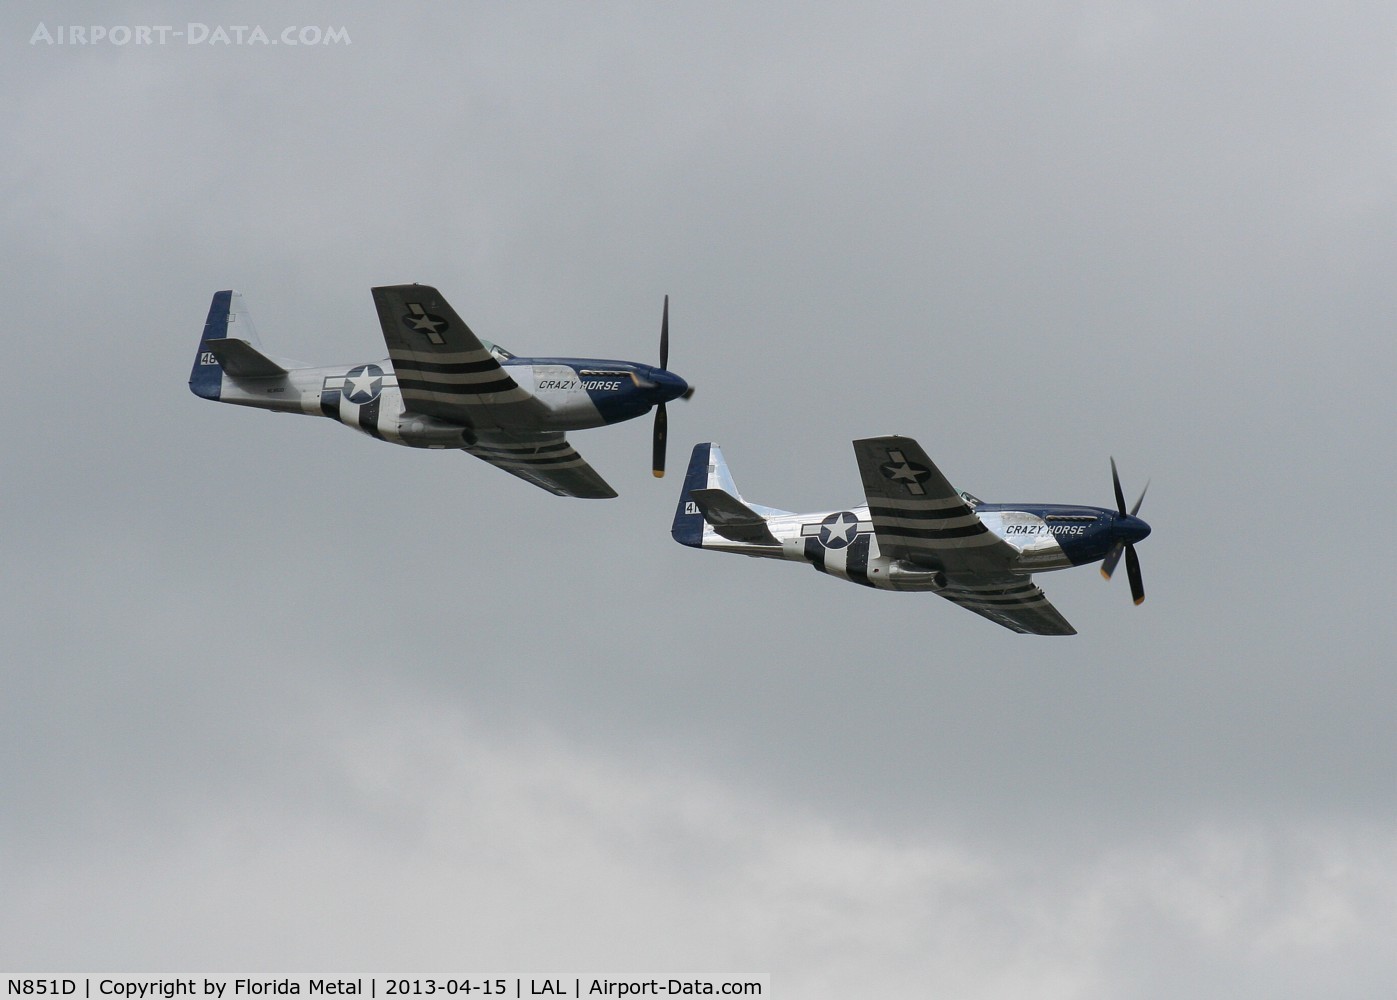 N851D, 1944 North American P-51D Mustang C/N 44-84745, Crazy Horse 1 and 2